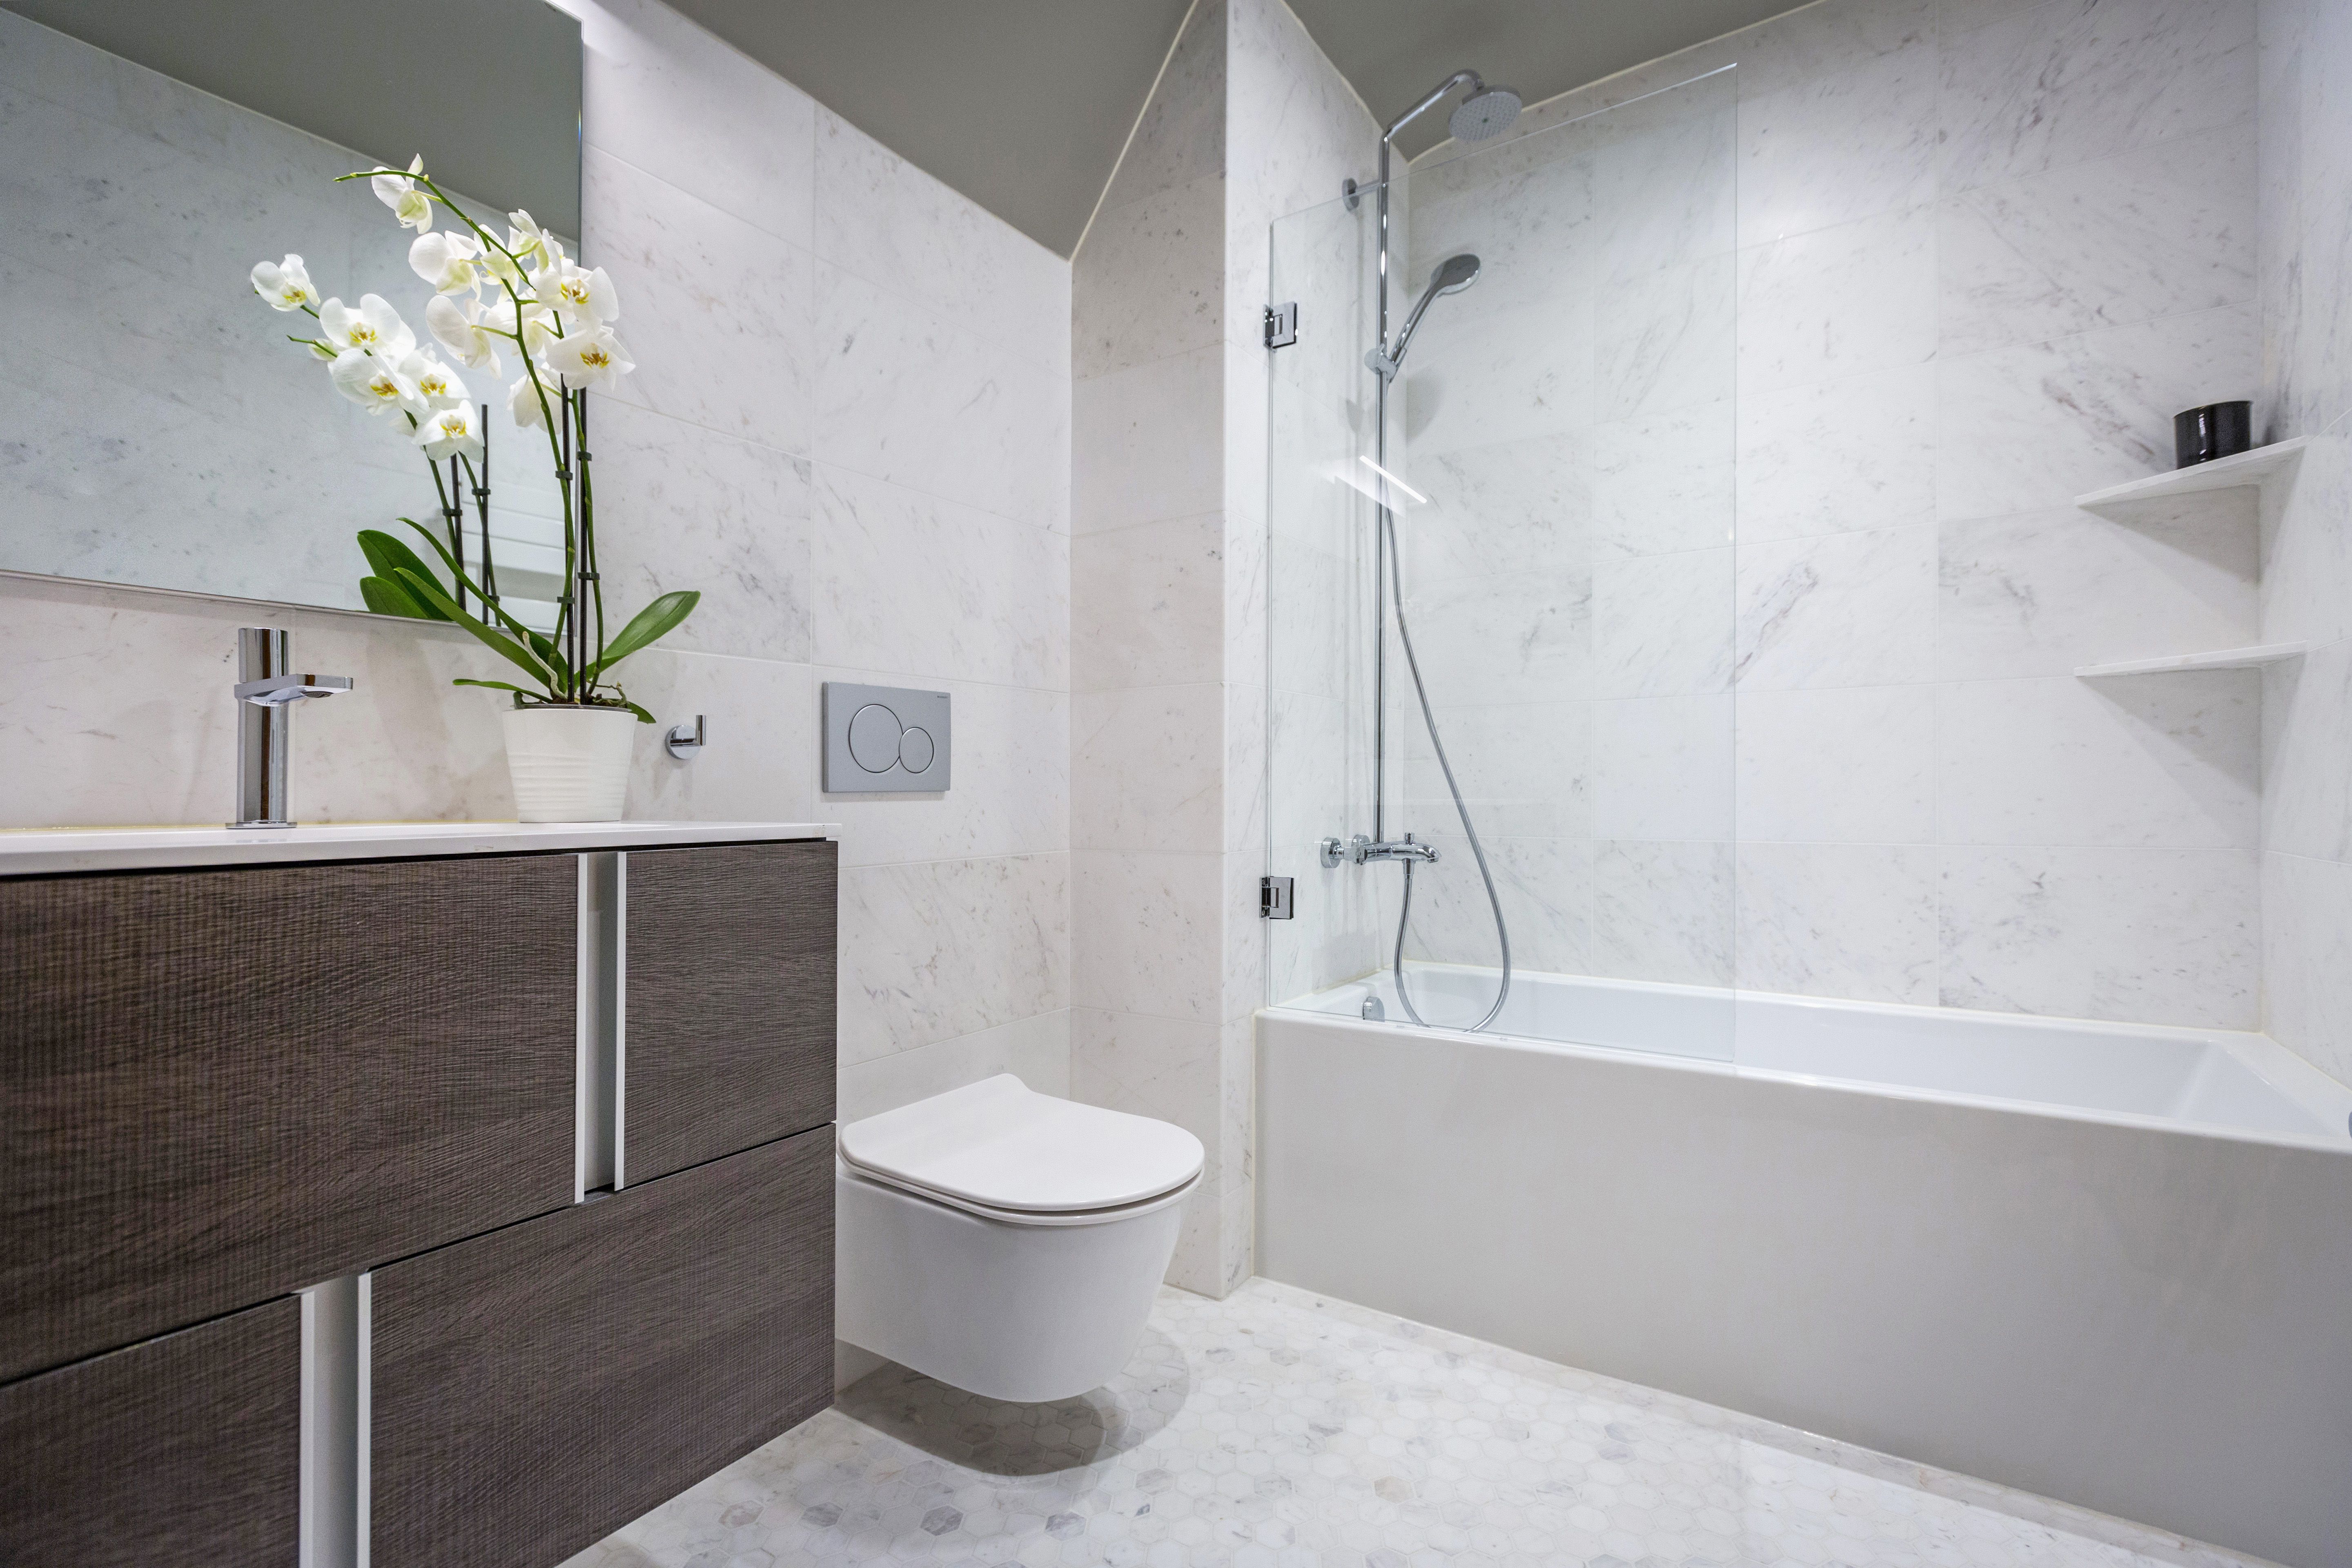 Clean and minimal modern bathroom with custom cabinets by interior designer, RM Interiors.